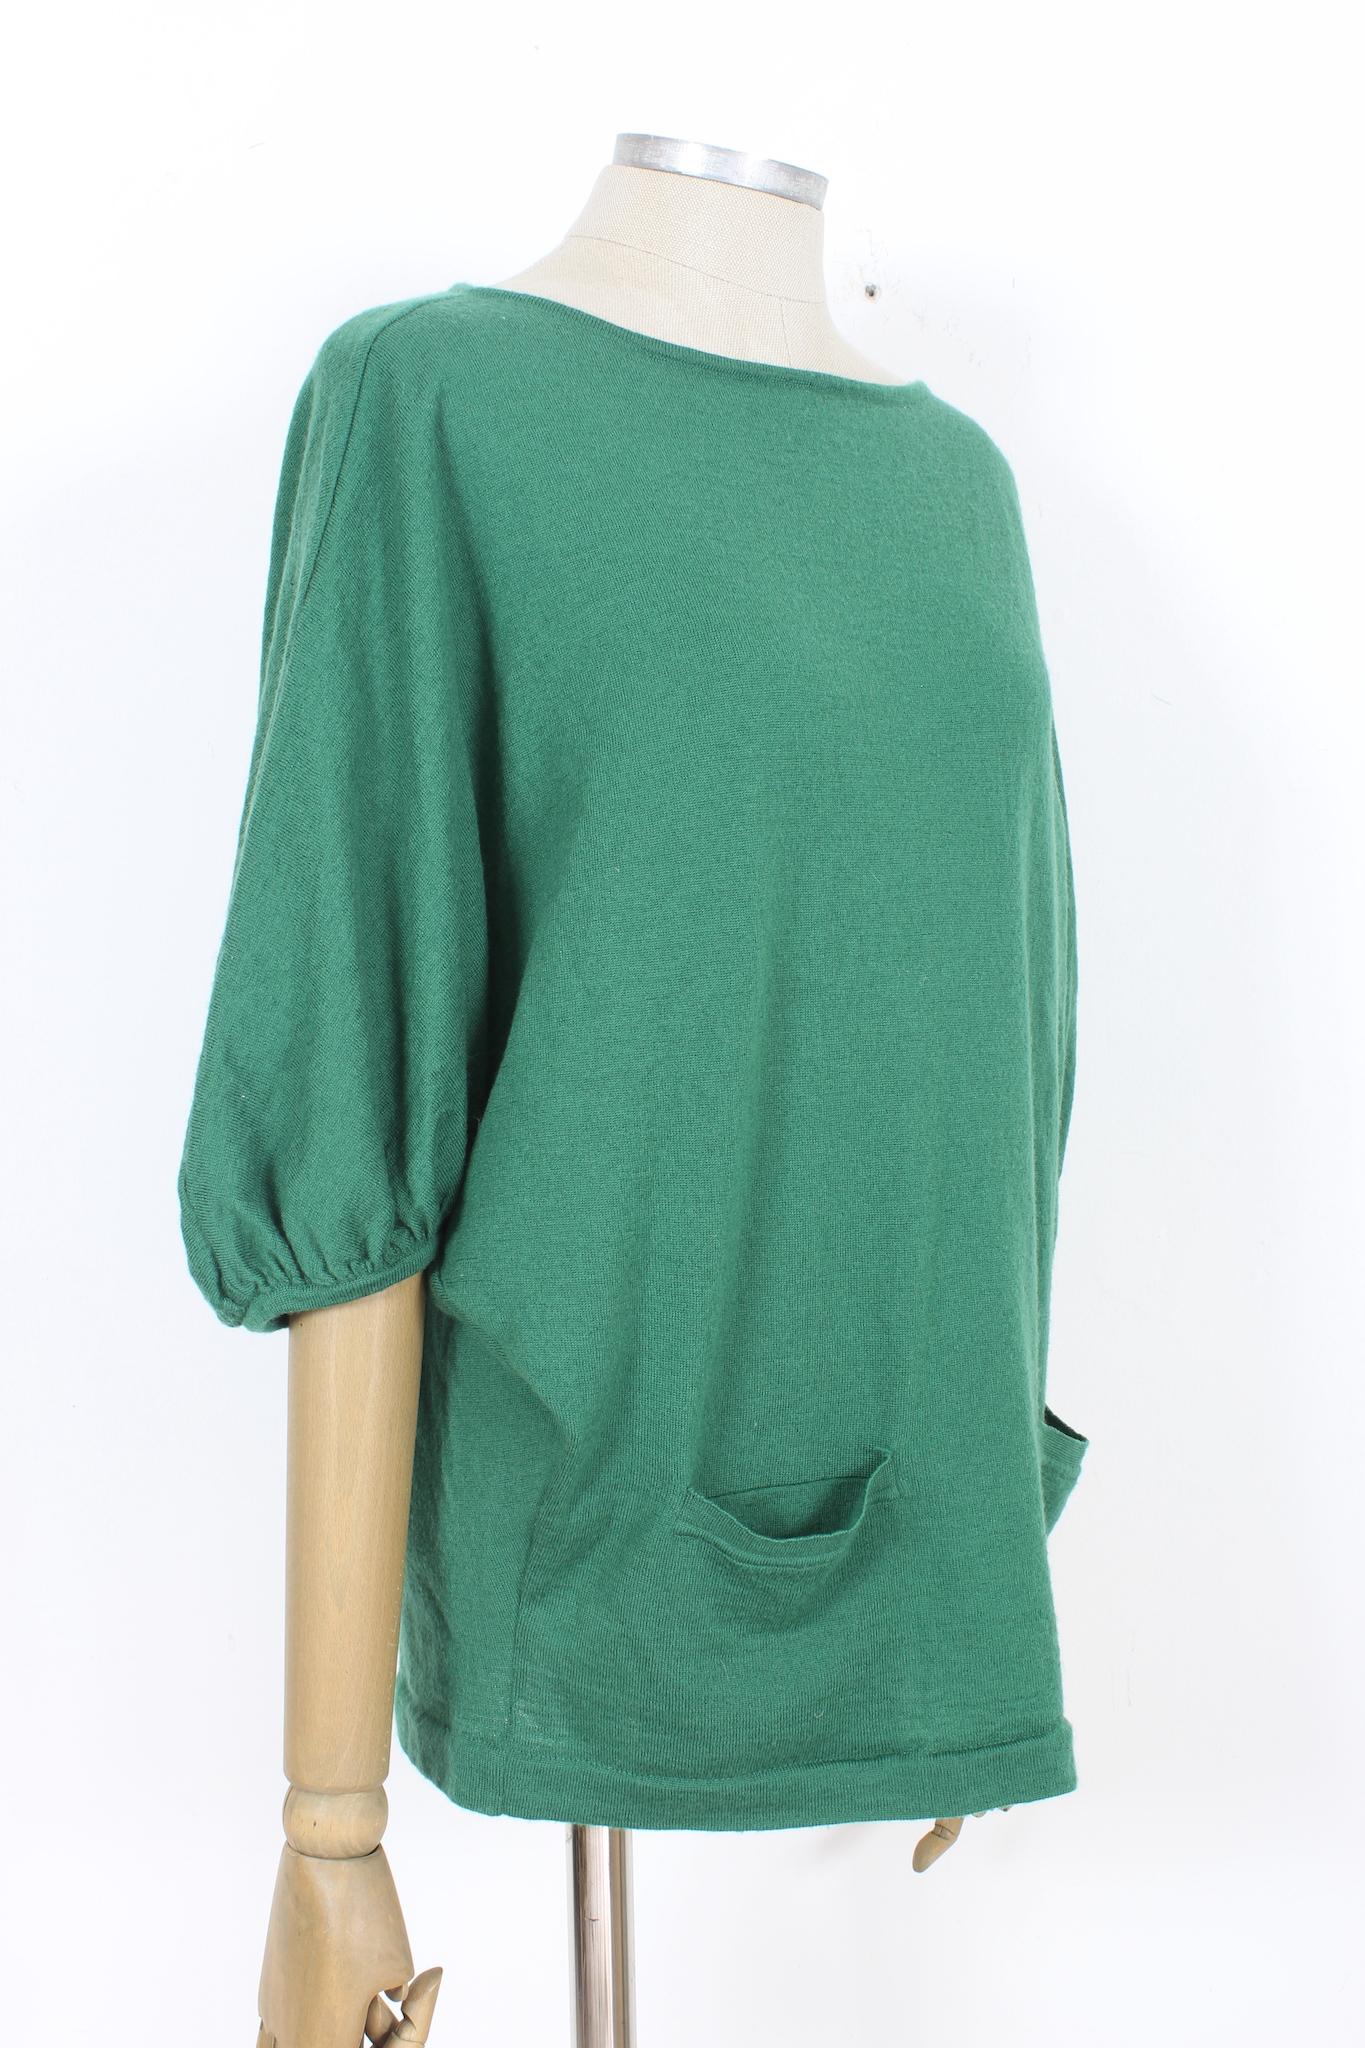 Alberta Ferretti 2000s casual sweater. Soft sweater with wide 3/4 sleeves, green color, 100% wool. Made in italy.

Size: 40 It 6 Us 8 Uk

Shoulder: 46cm
Bust/Chest: 68 cm
Sleeve: 42 cm
Length: 64 cm